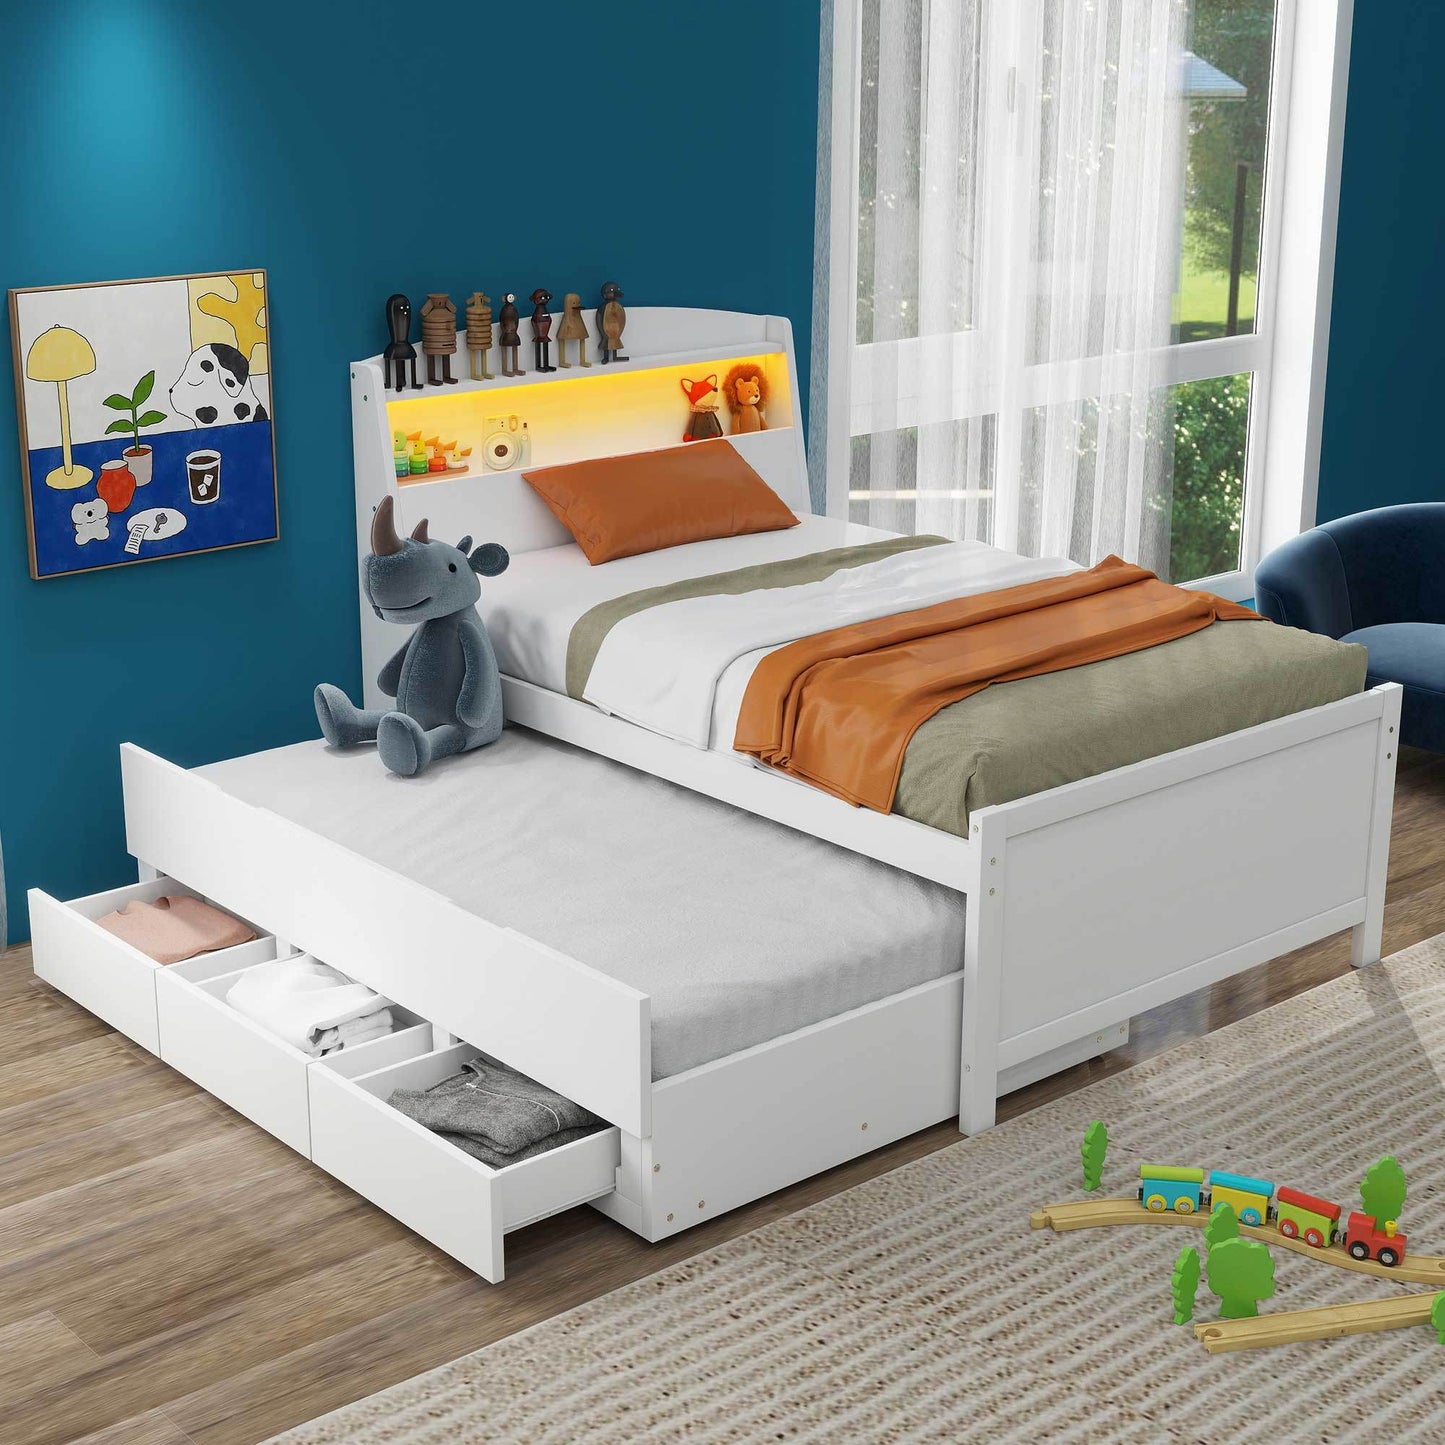 platform bed with storage led headboard, twin size trundle and 3 drawers, white